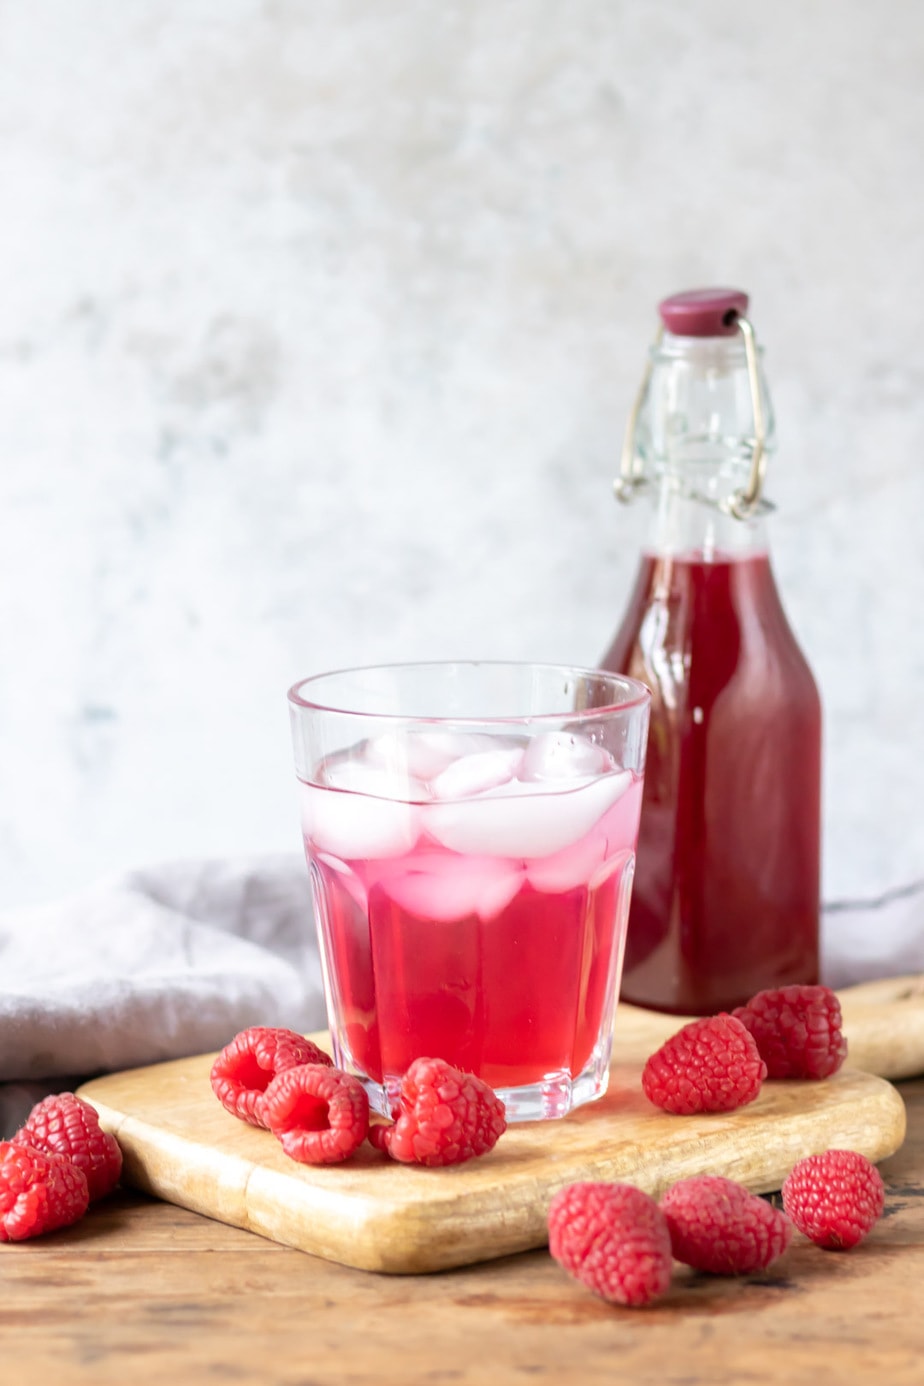 Glass of drink and bottle of raspberry syrup.